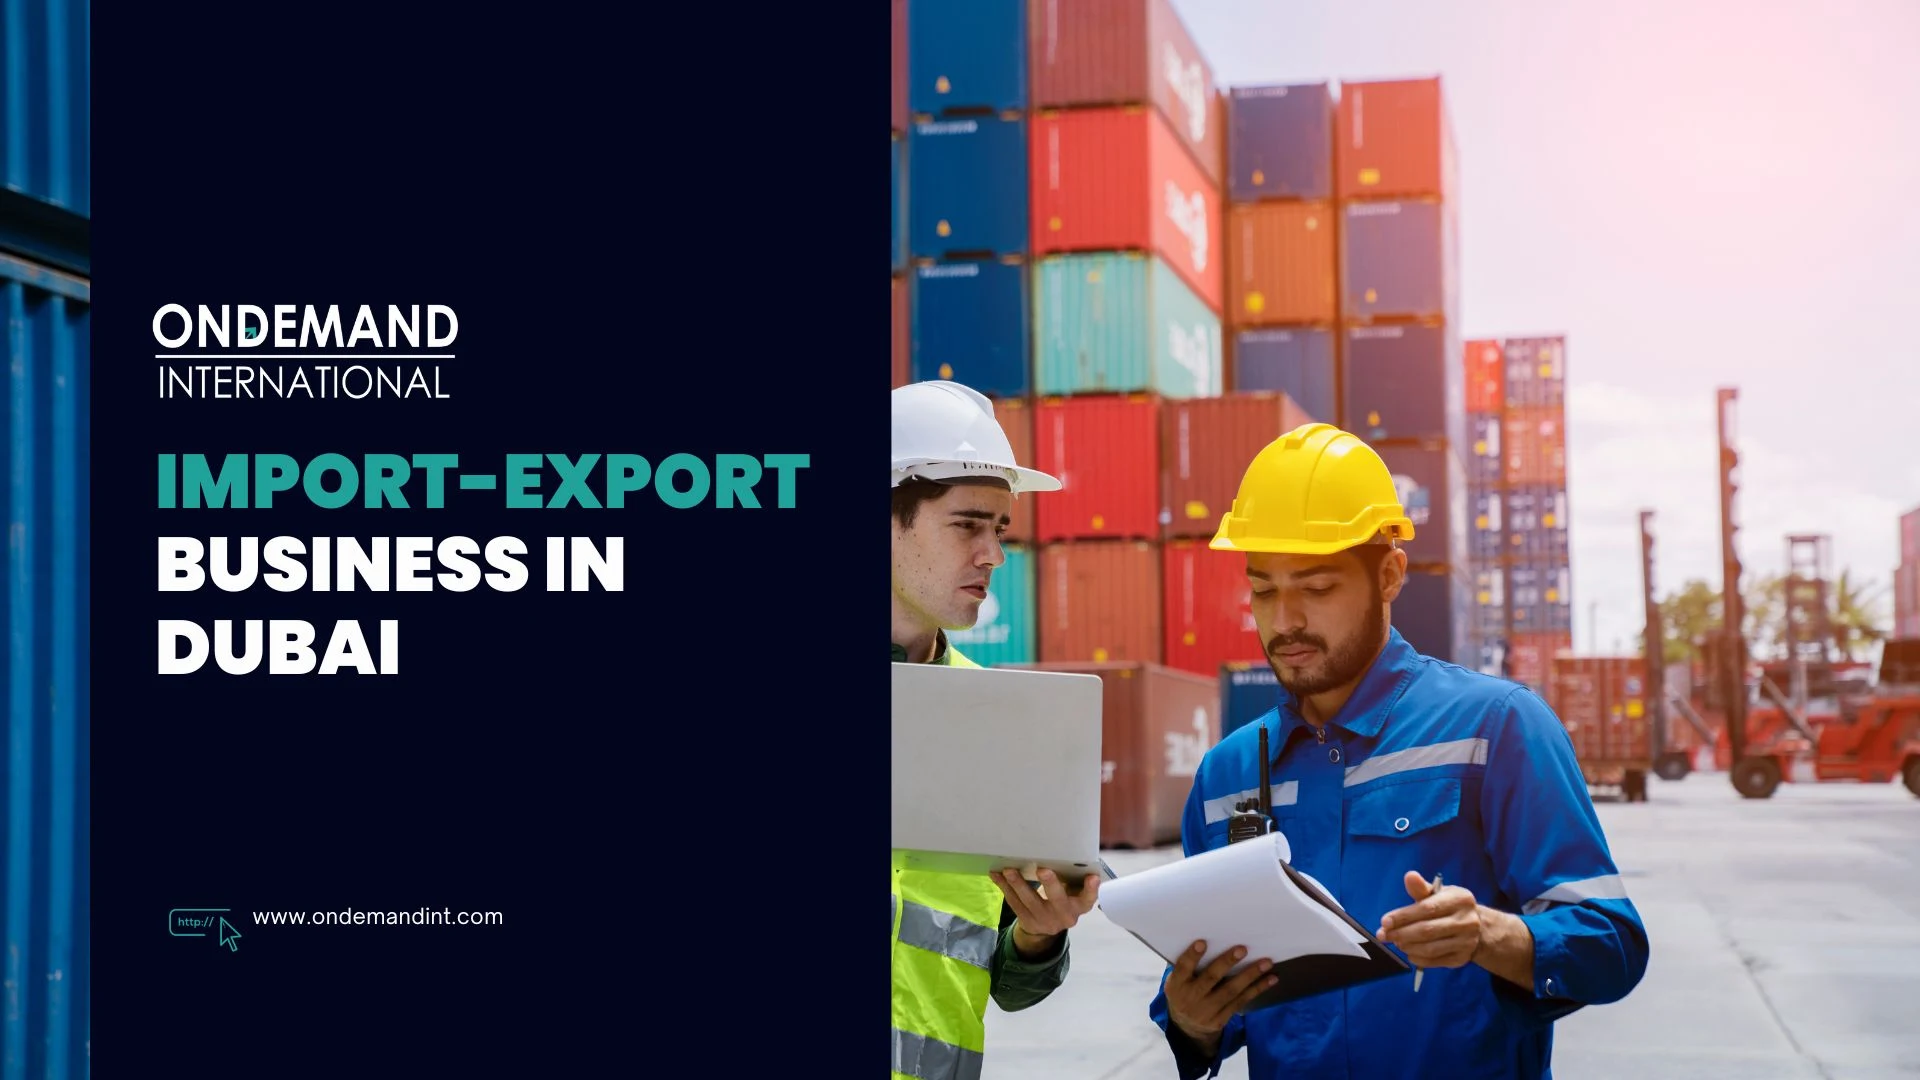 How to Start an Import-Export Business in Dubai